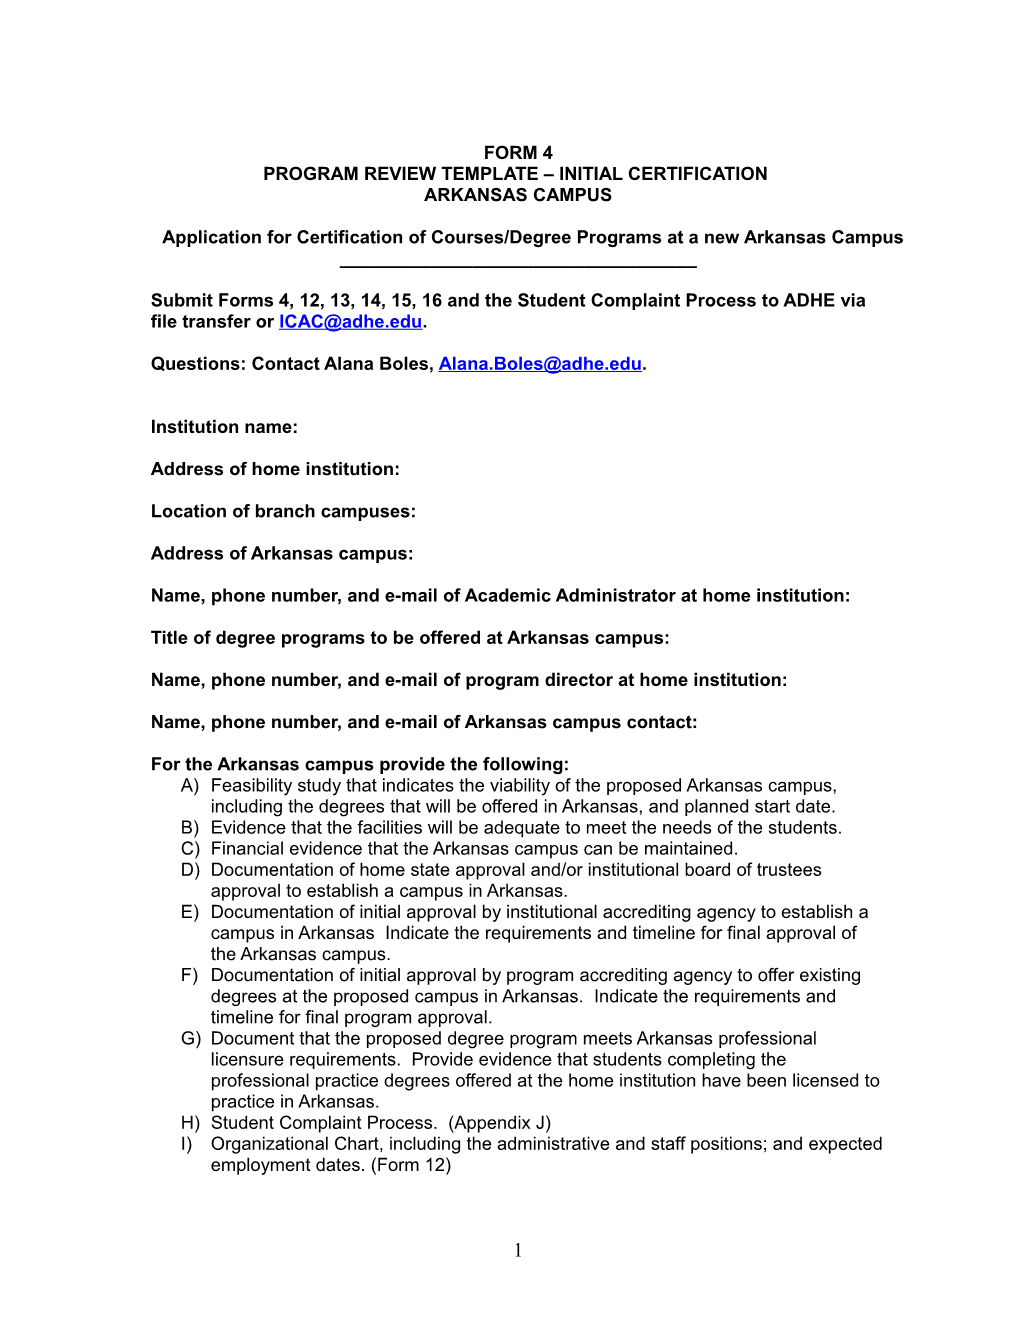 Form 4 Application for Certification of Course Degree Program